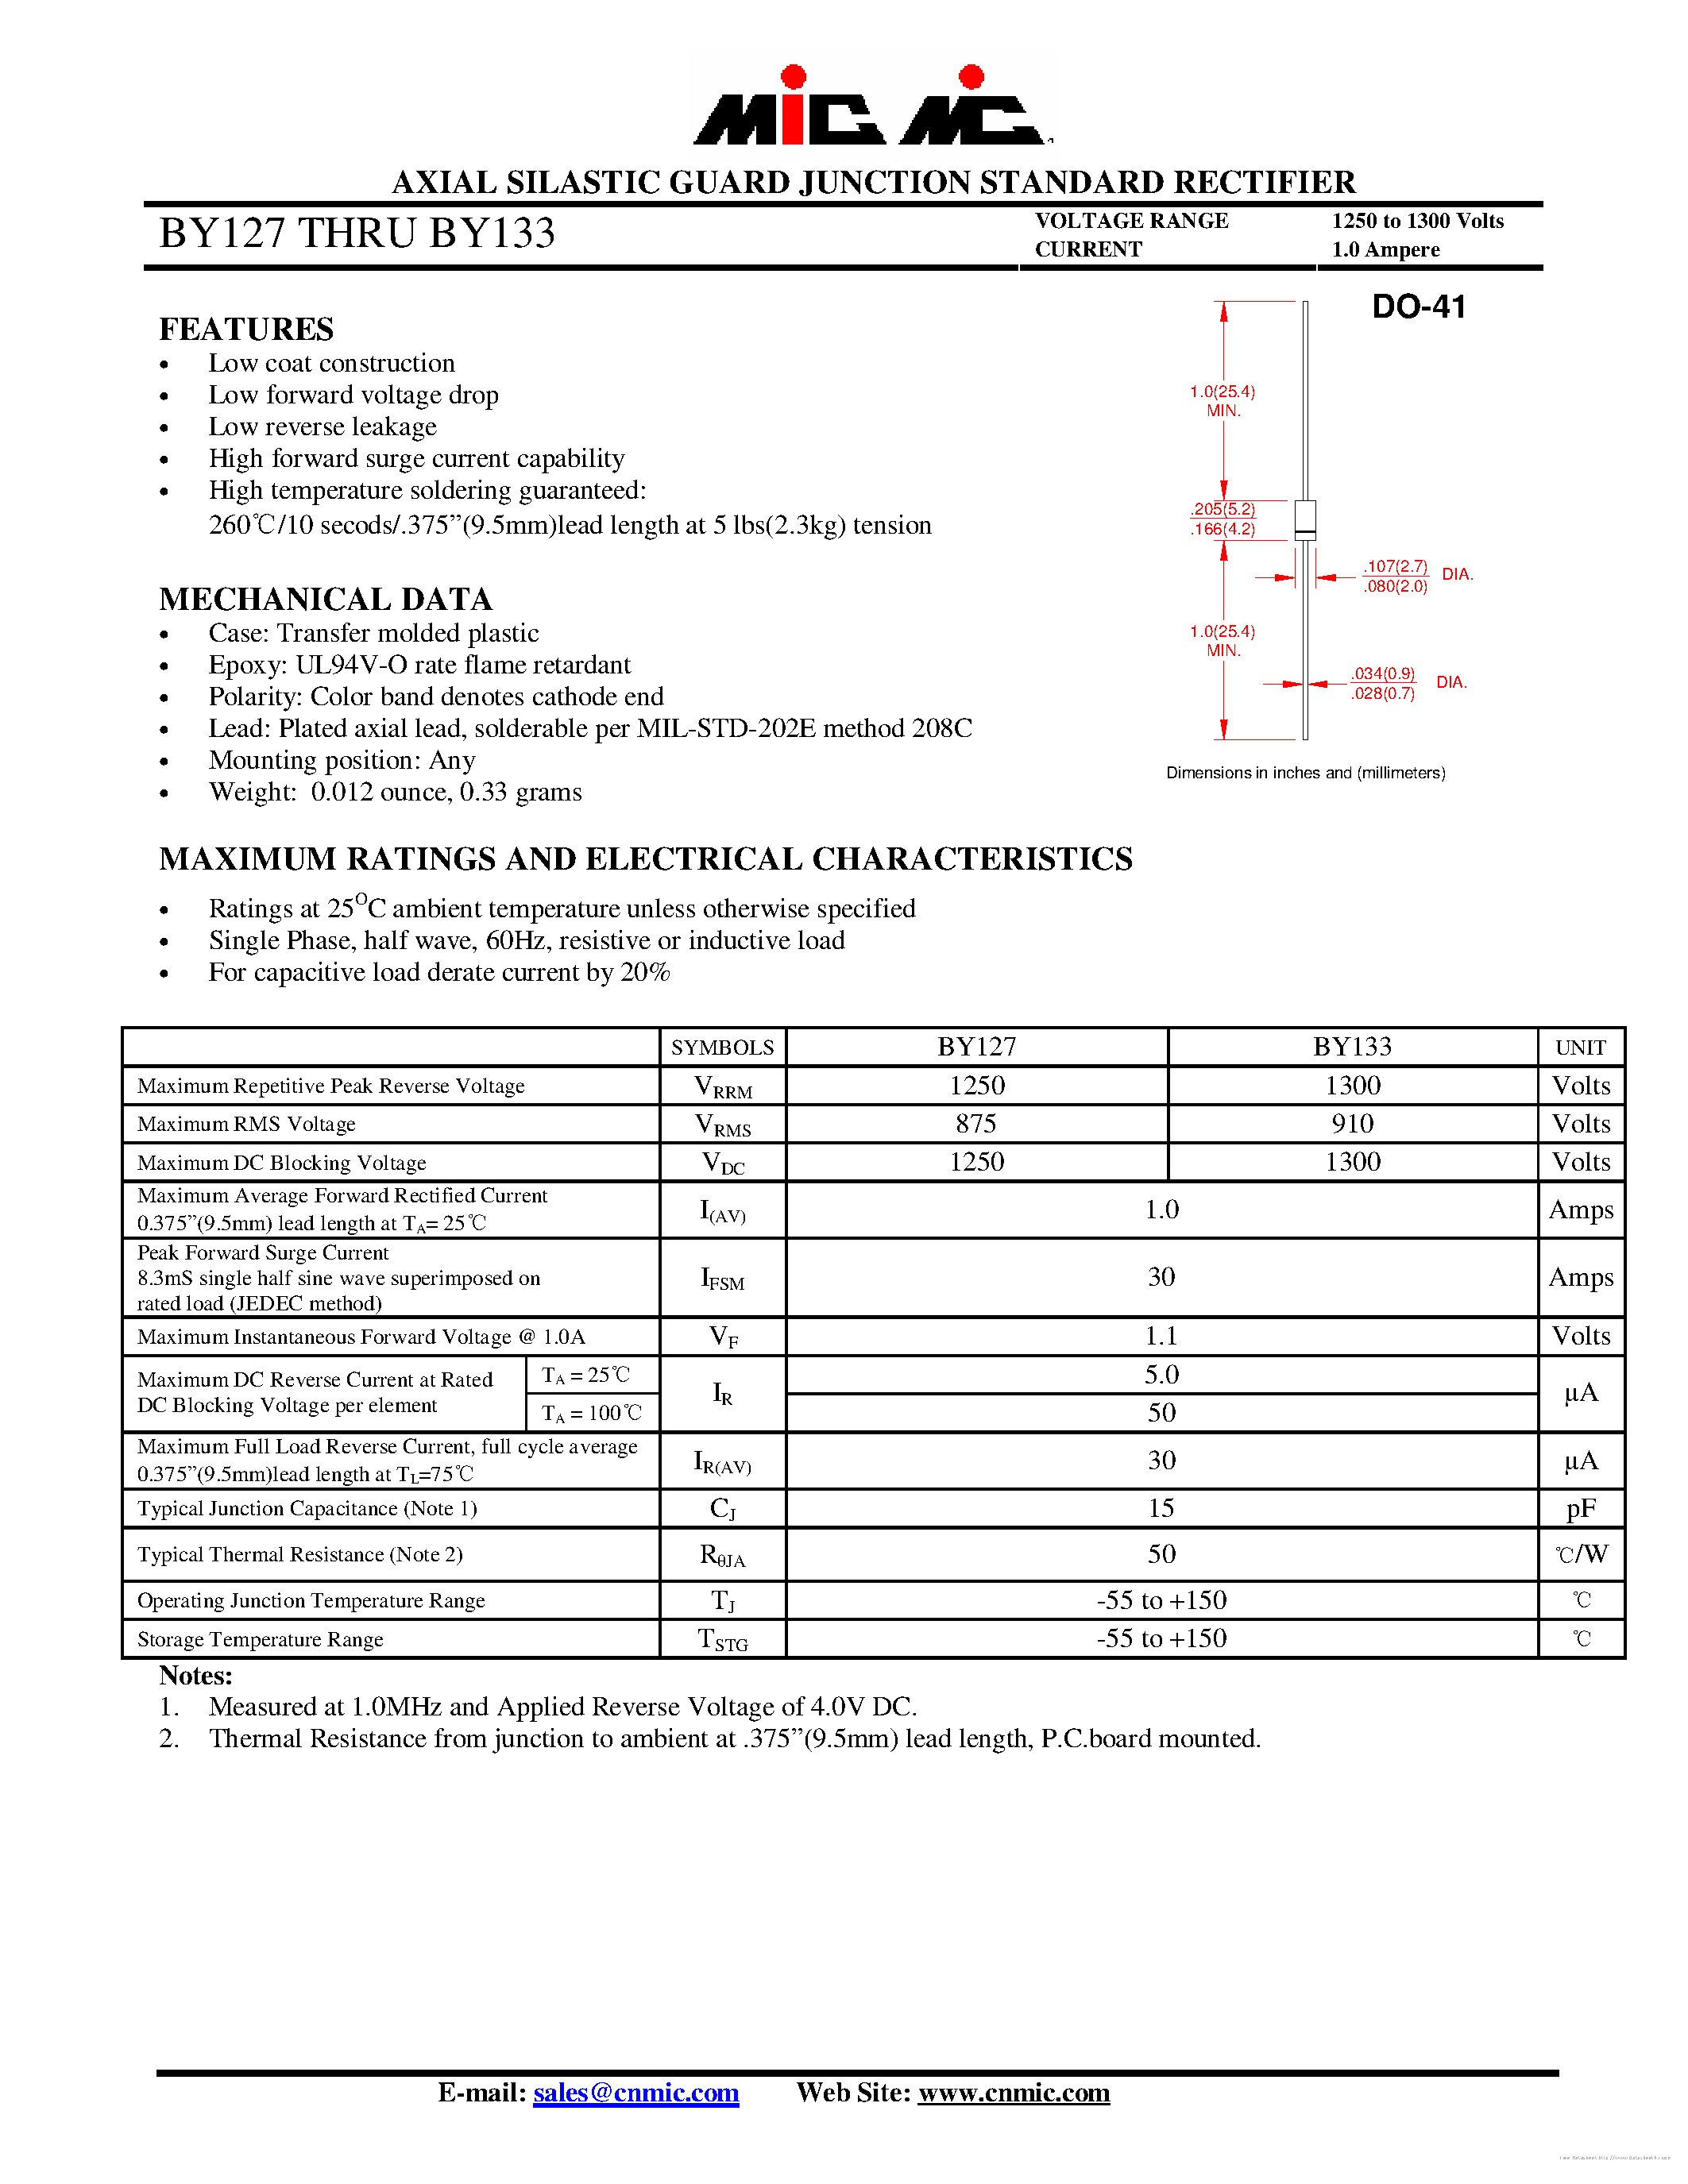 Datasheet BY127 - page 1